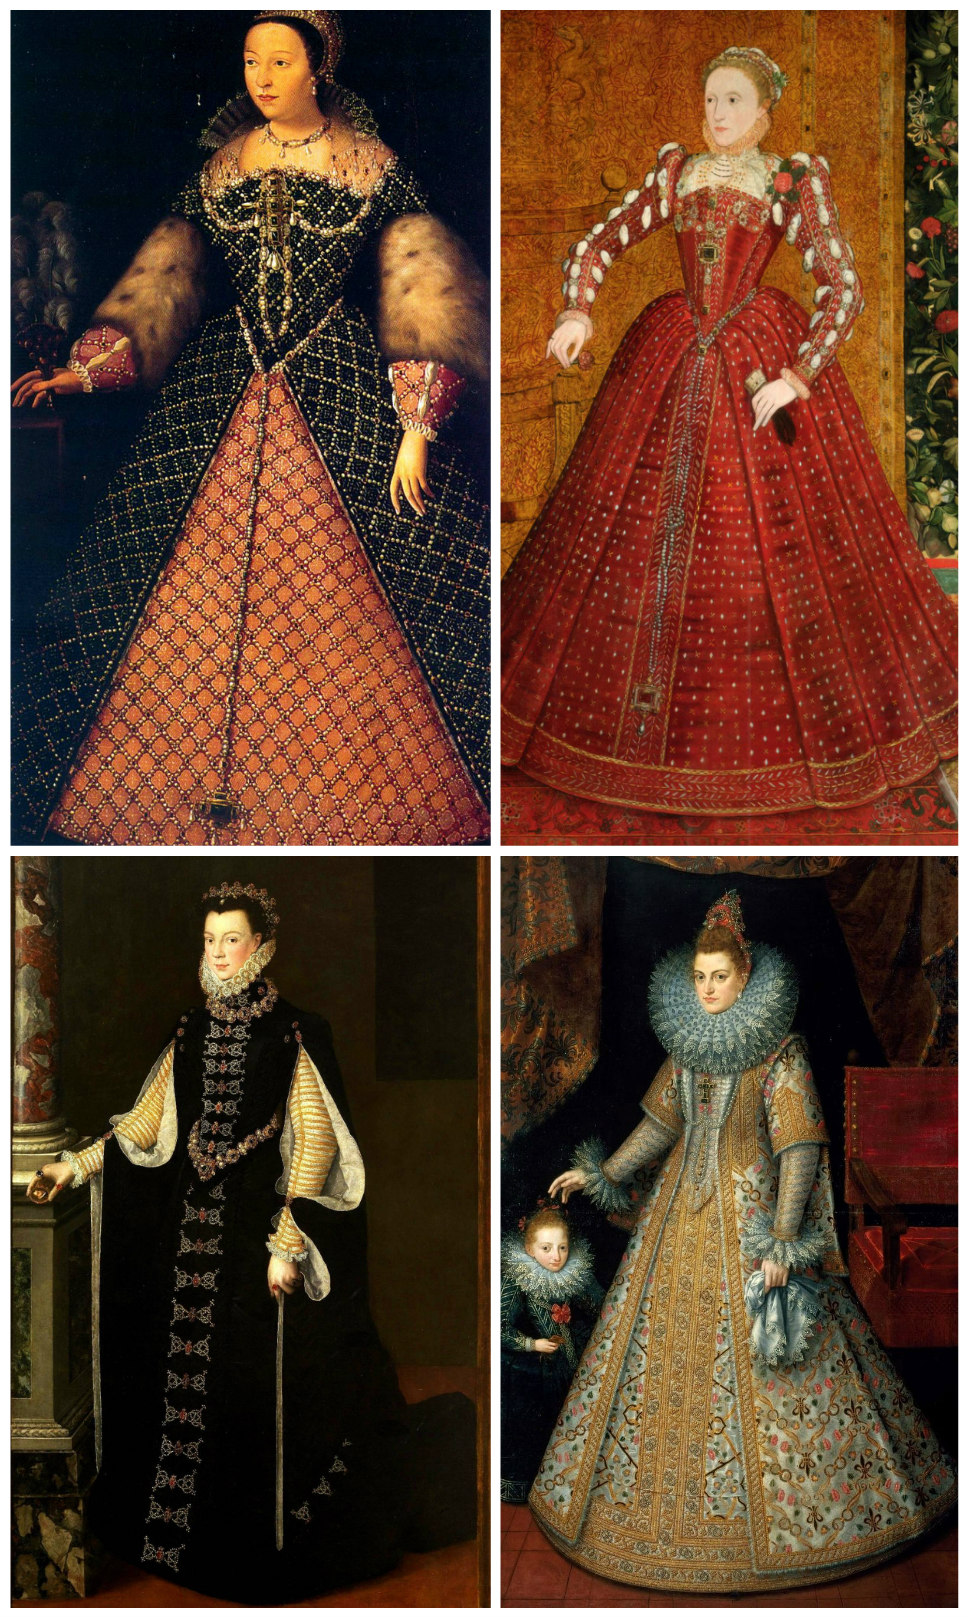 Spanish farthingale. Clockwise from top left: Catherin de Medici, c. 1555; Queen Elizabeth I of England, c. 1563; Elizabeth of Valois, Queen of Spain, 1565; Isabella of the Spanish Netherlands, 1599